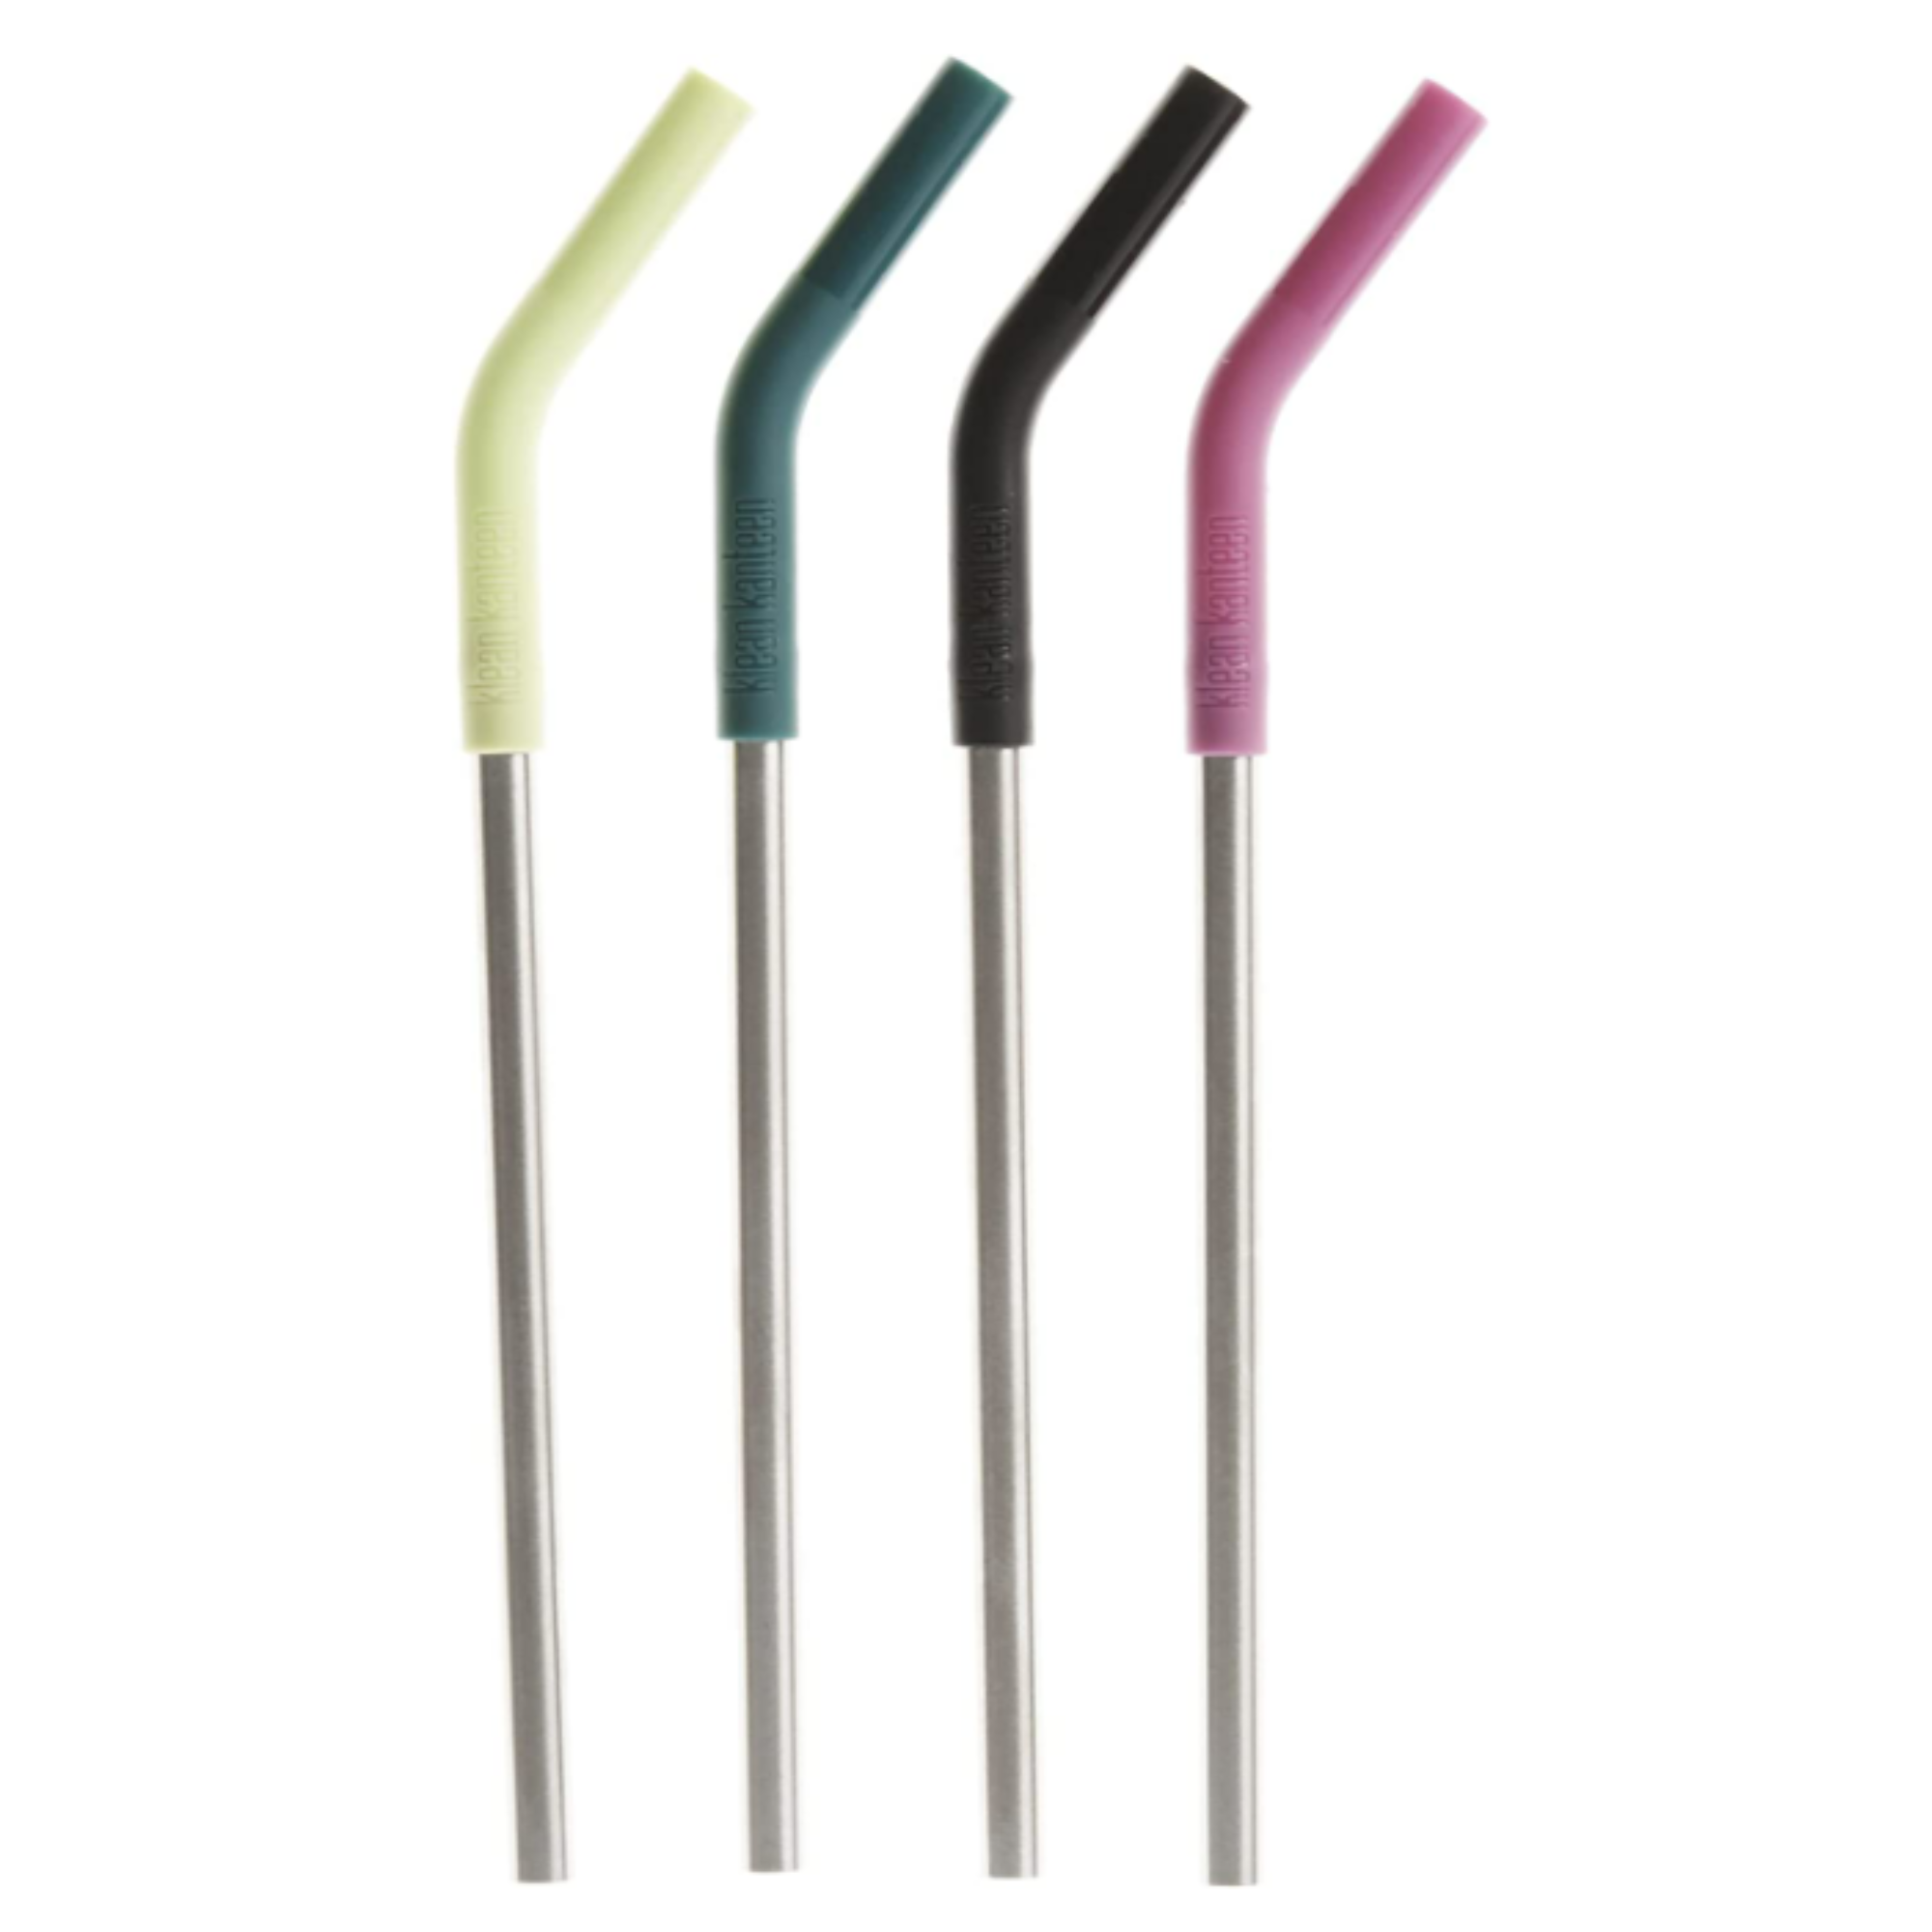 Four reusable straws in a variety of colors (one in black, one dark green, one neon